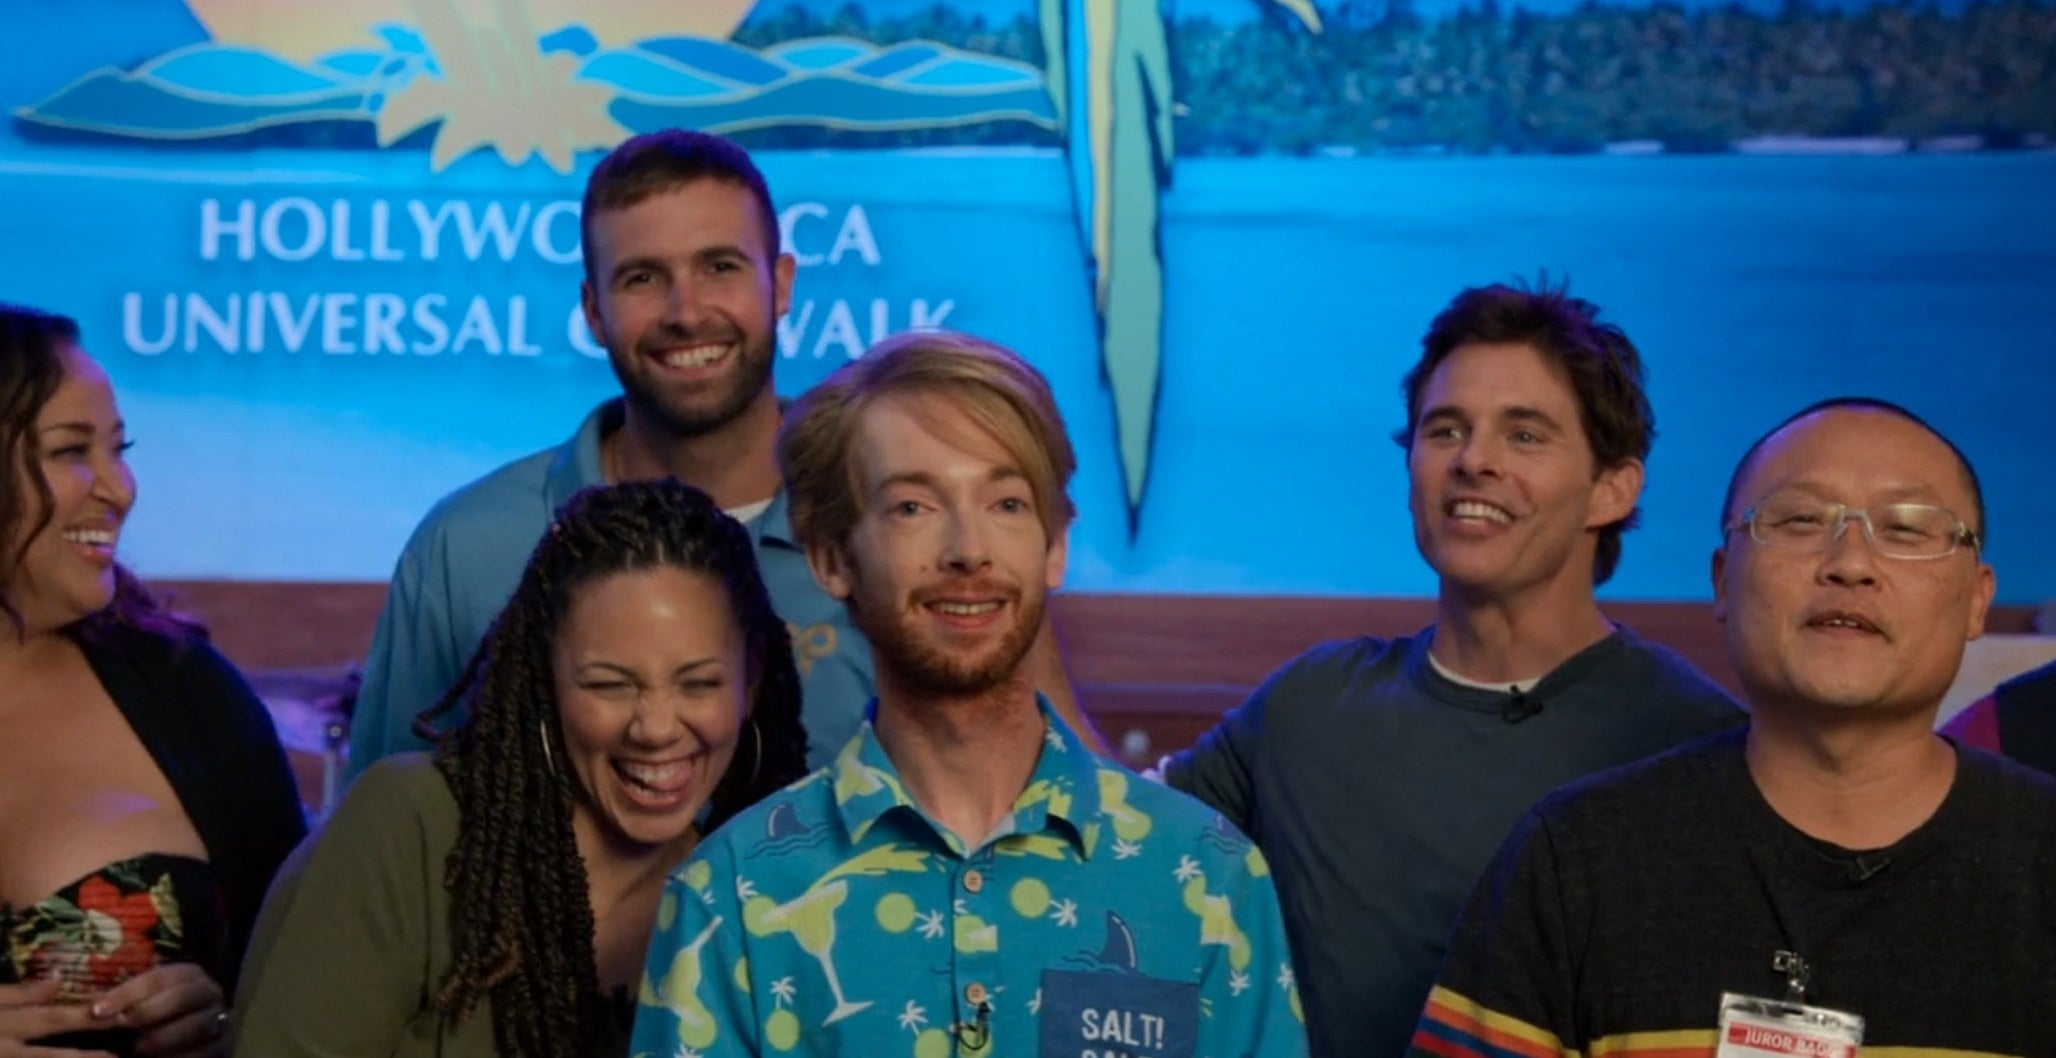 The &quot;Jury Duty&quot; cast laughs as they leave Margaritaville